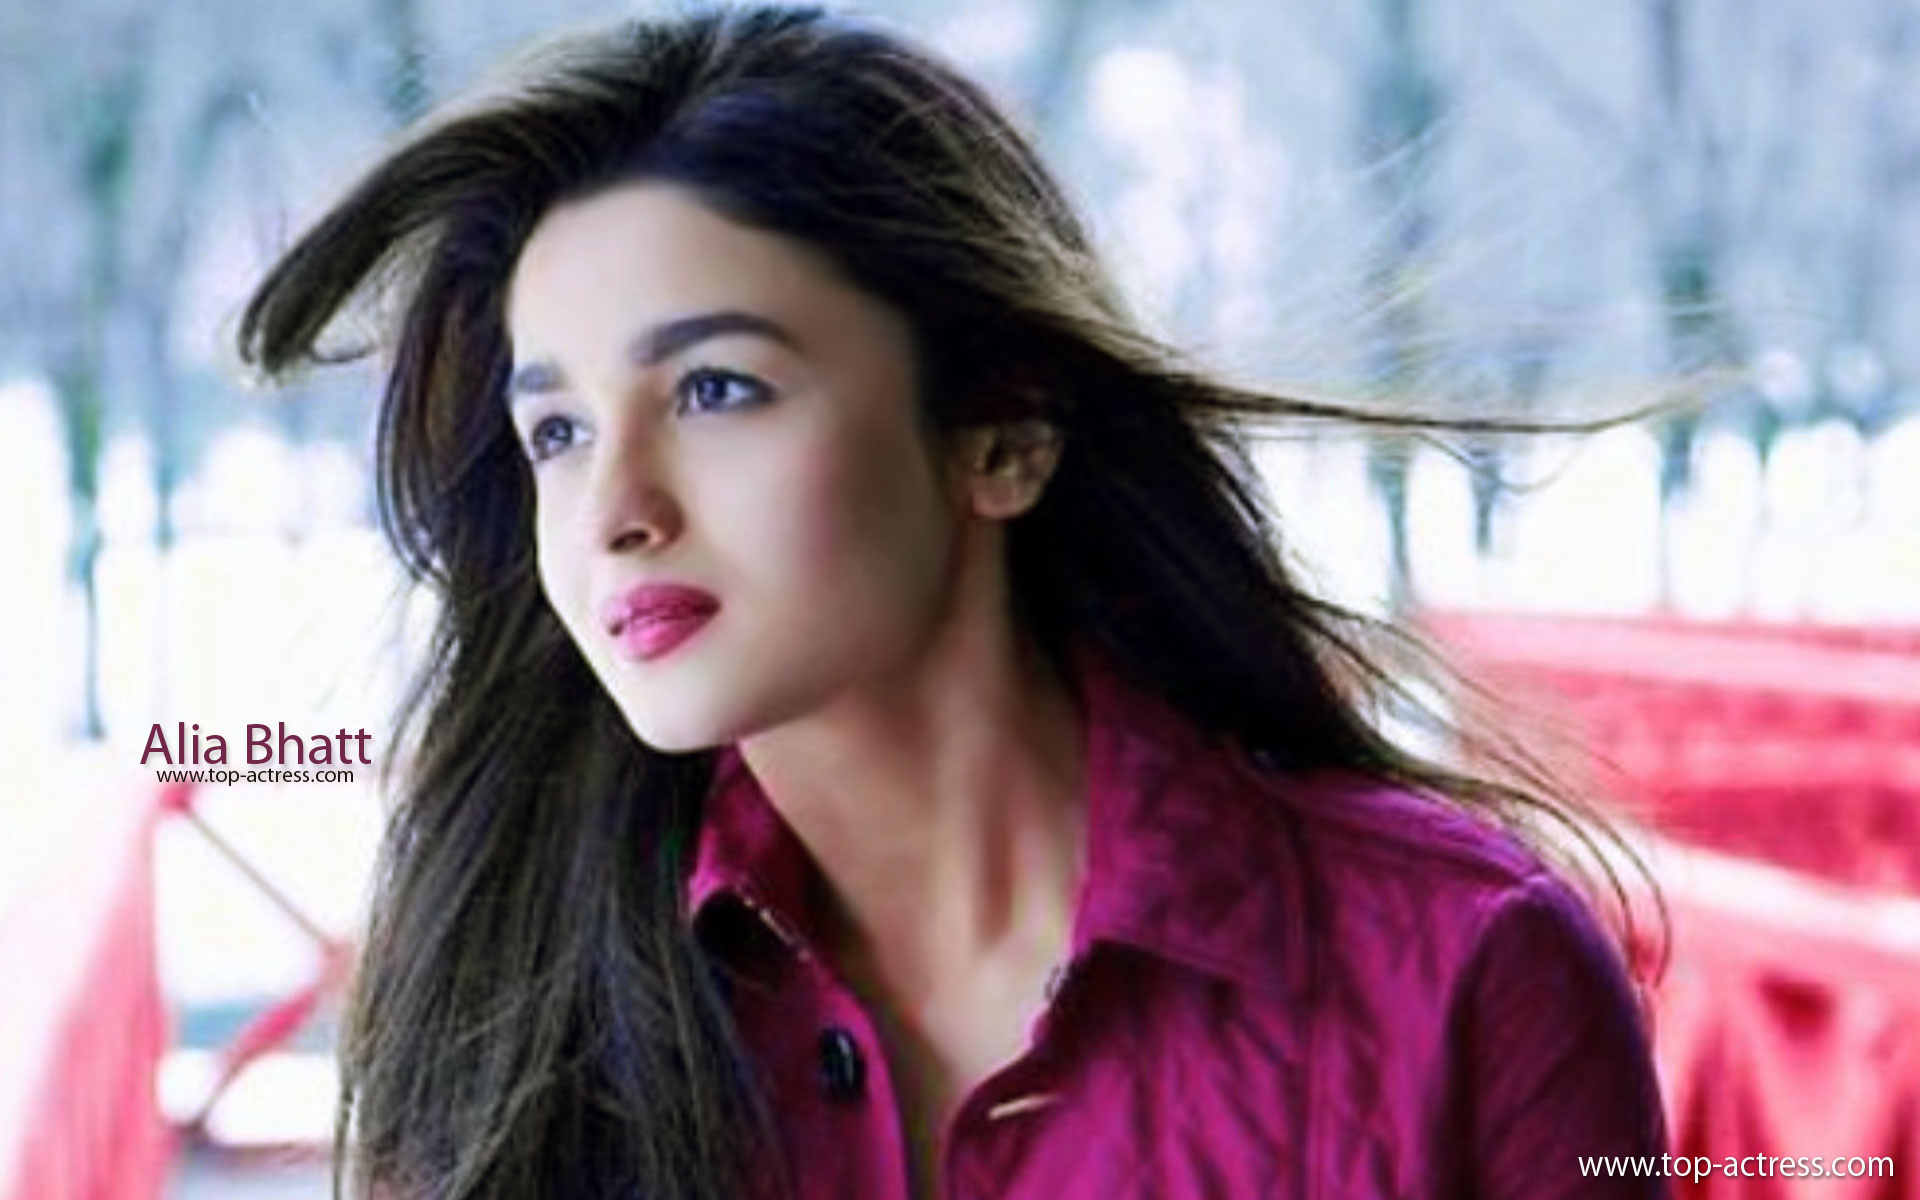 Free download alia bhatt latest hd wallpapers pc wallpapers x for your desktop mobile tablet explore new hd wallpapers new wallpaper hd hd new wallpaper wallpaper new hd